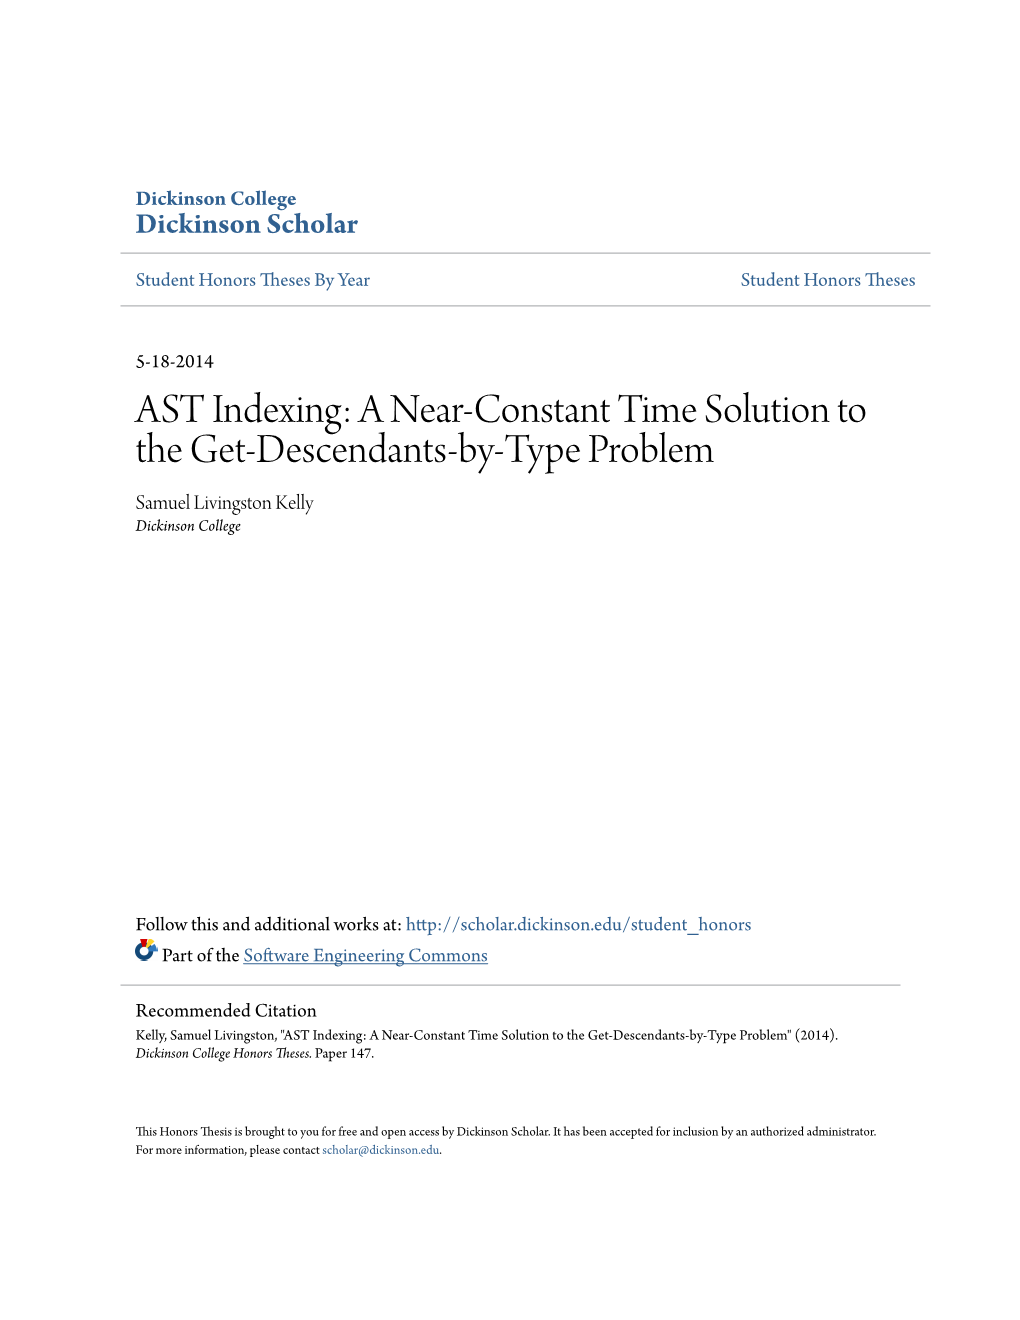 AST Indexing: a Near-Constant Time Solution to the Get-Descendants-By-Type Problem Samuel Livingston Kelly Dickinson College